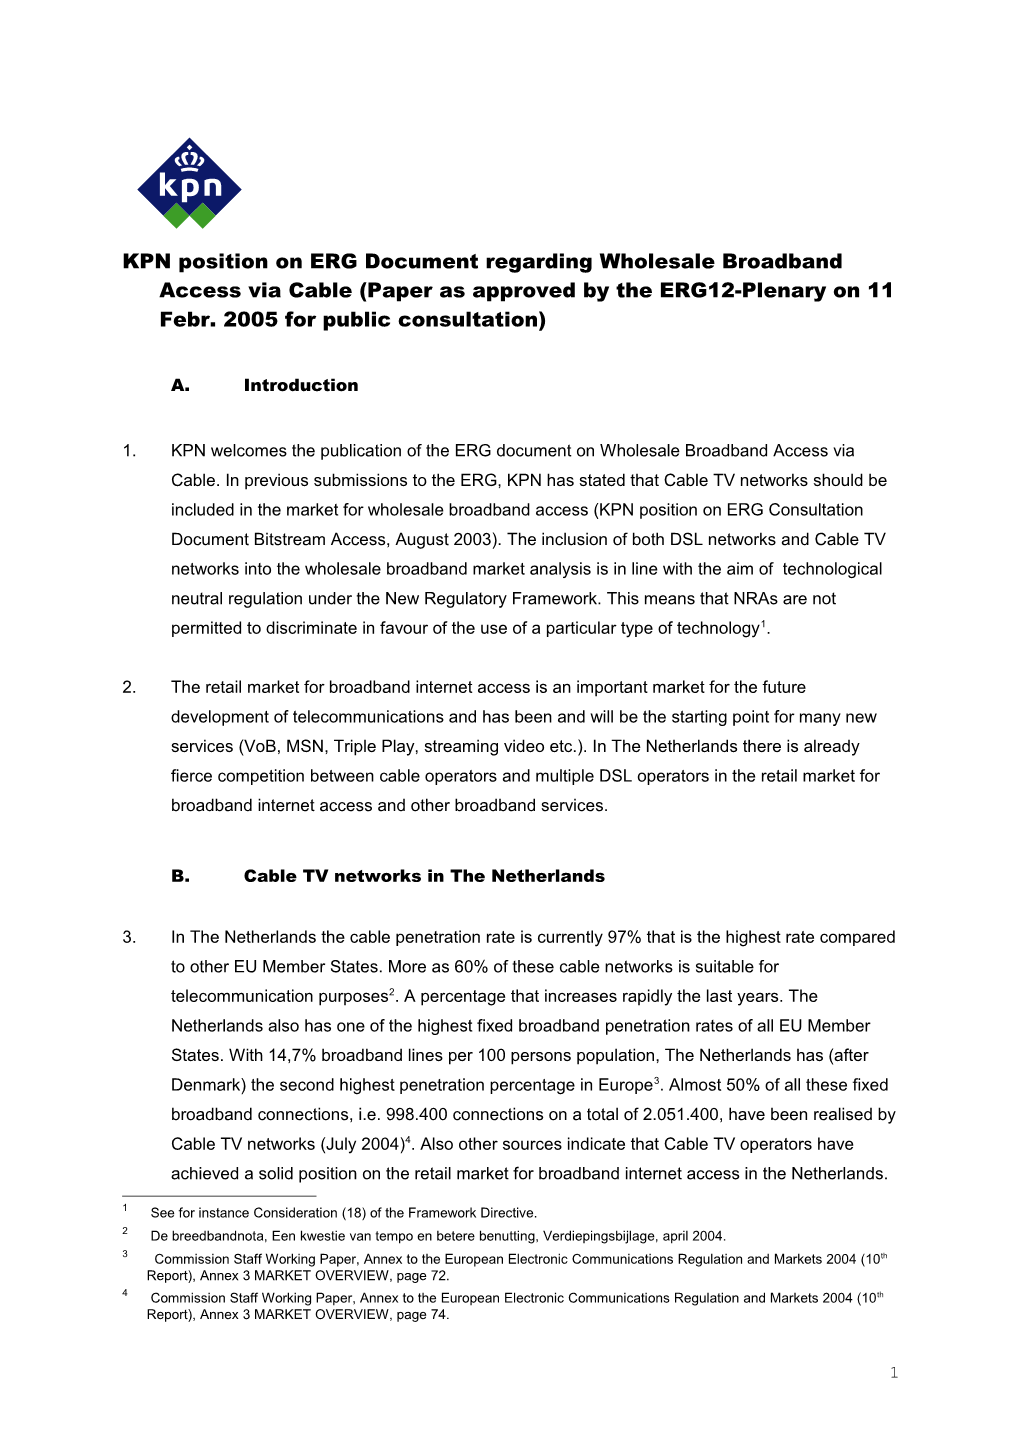 KPN Position on ERG Document Regarding Wholesale Broadband Access Via Cable (Paper As Approved